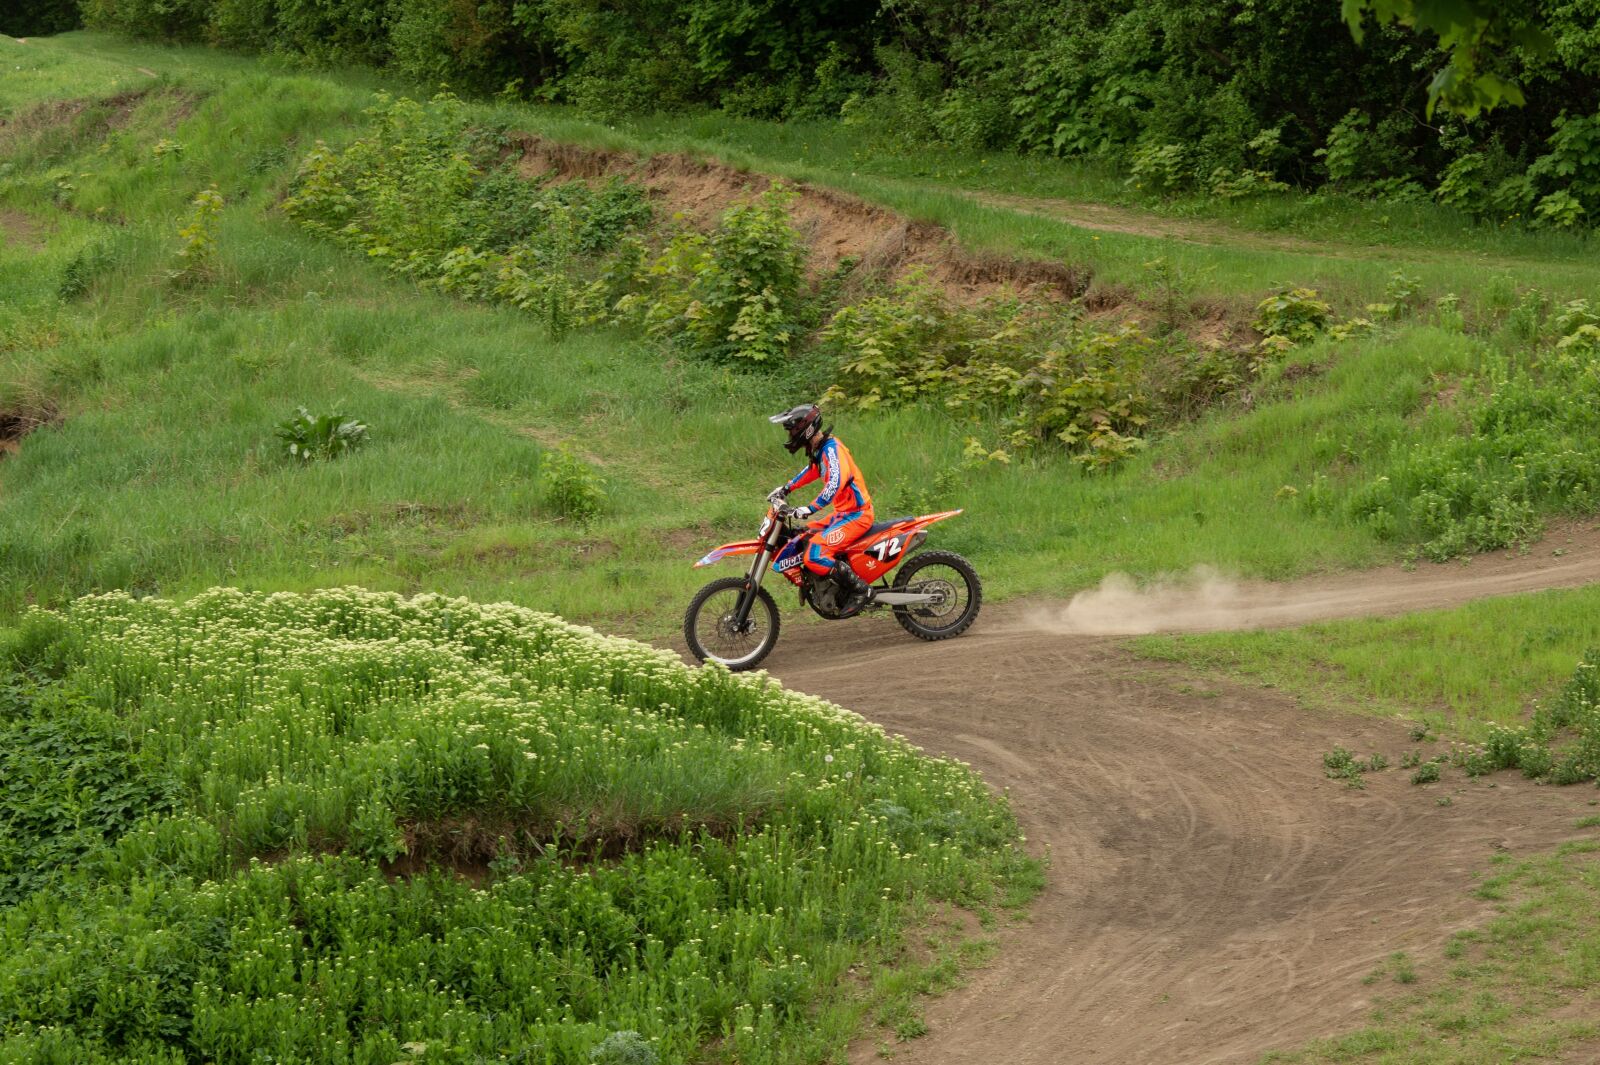 35-70mm F4 sample photo. Greens, leaves, motocross photography